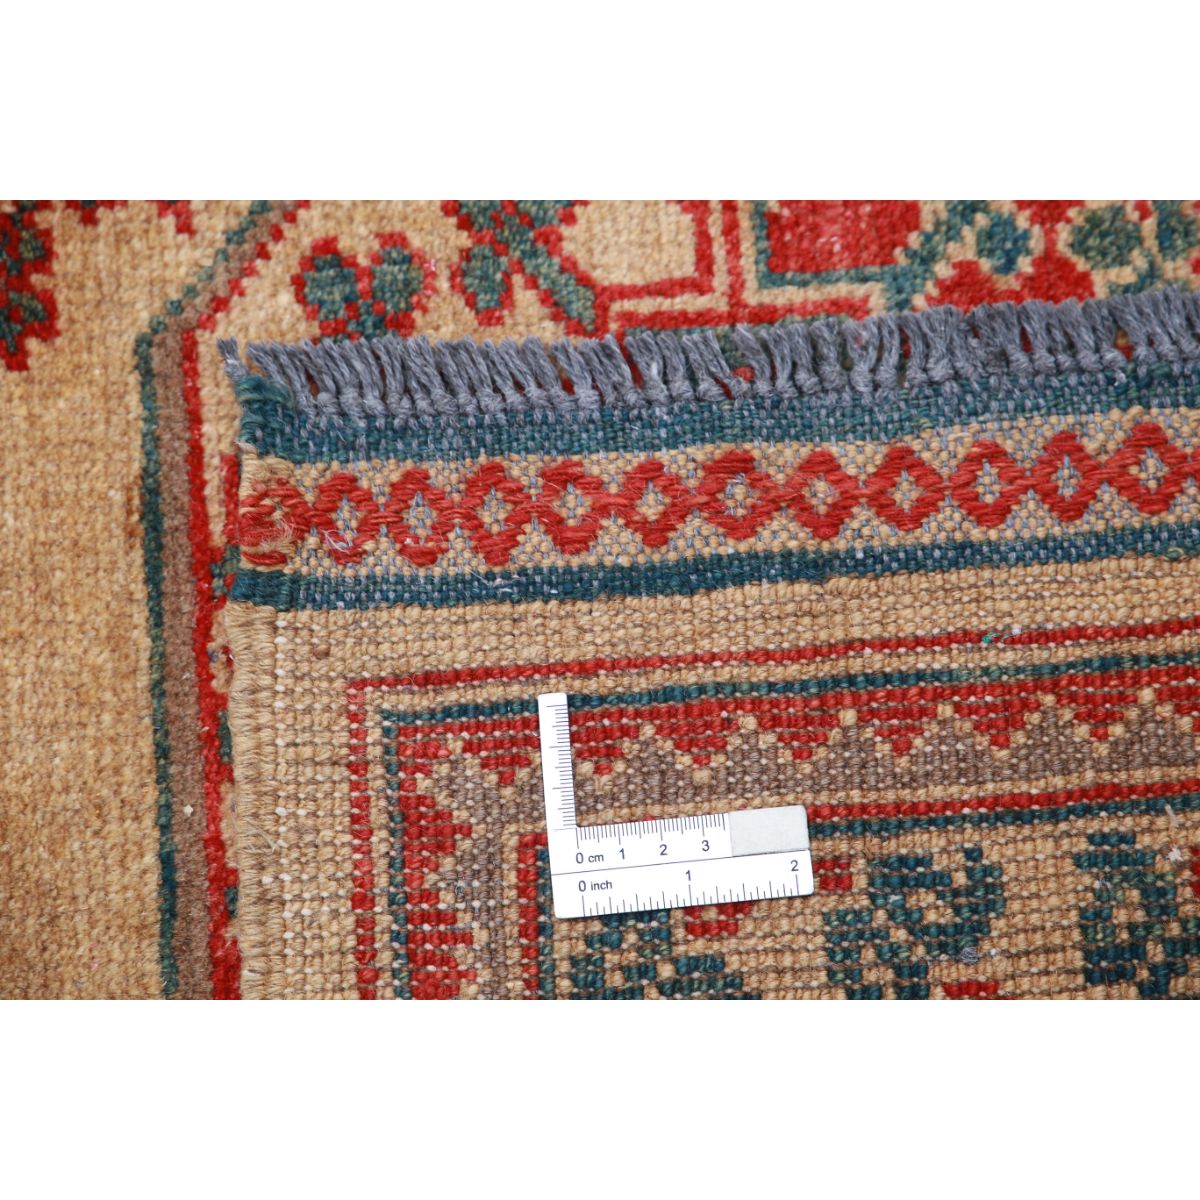 Revival 6' 9" X 10' 1" Wool Hand Knotted Rug